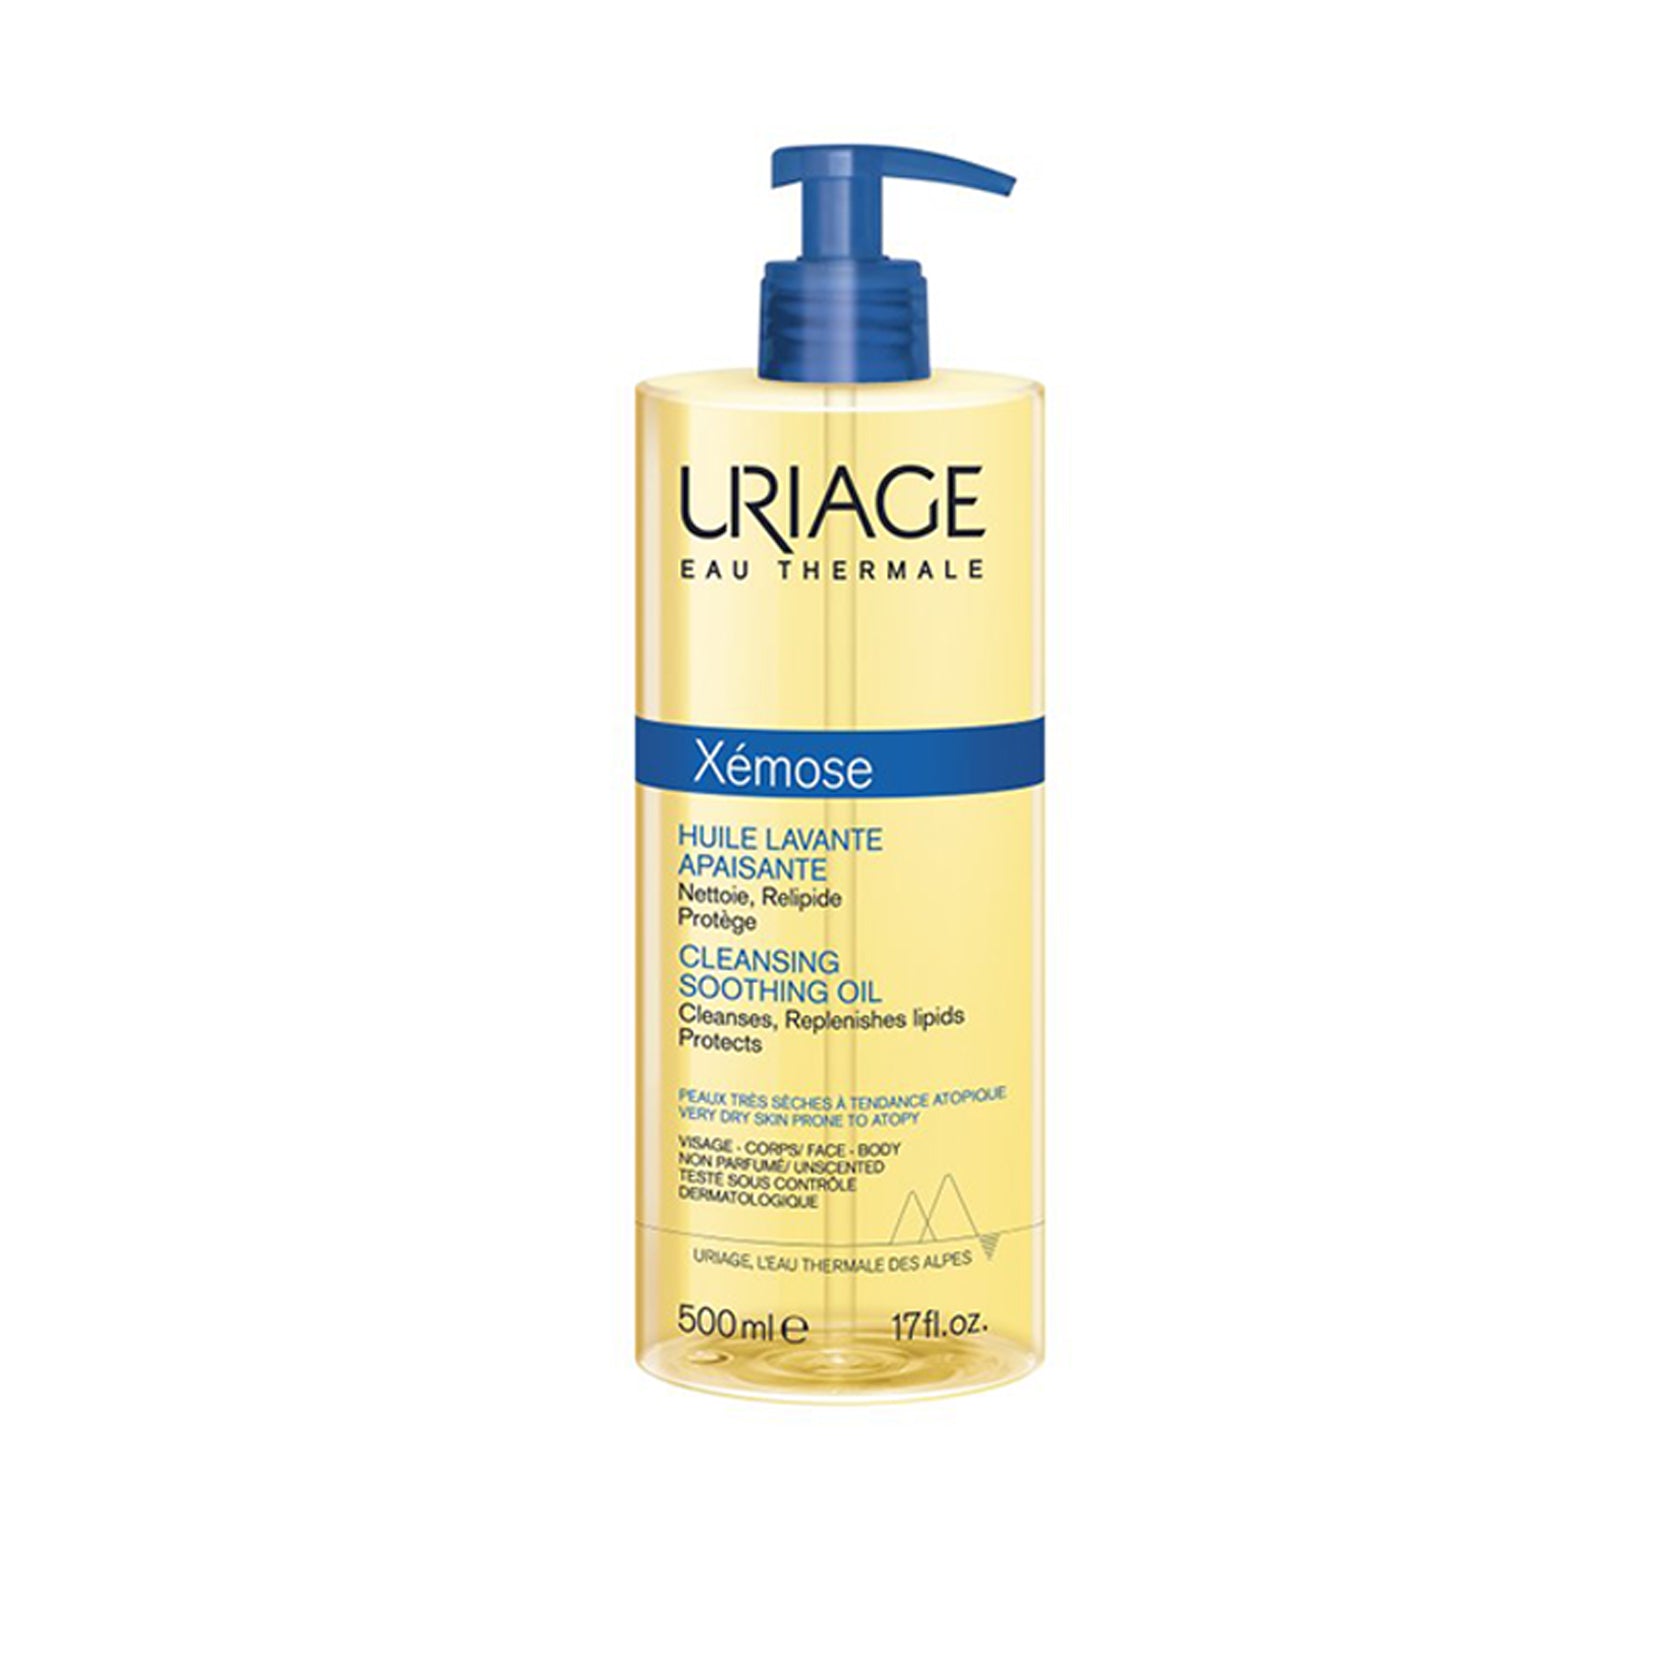 Uriage Xémose Cleansing Soothing Oil 500ml (16.91fl oz)